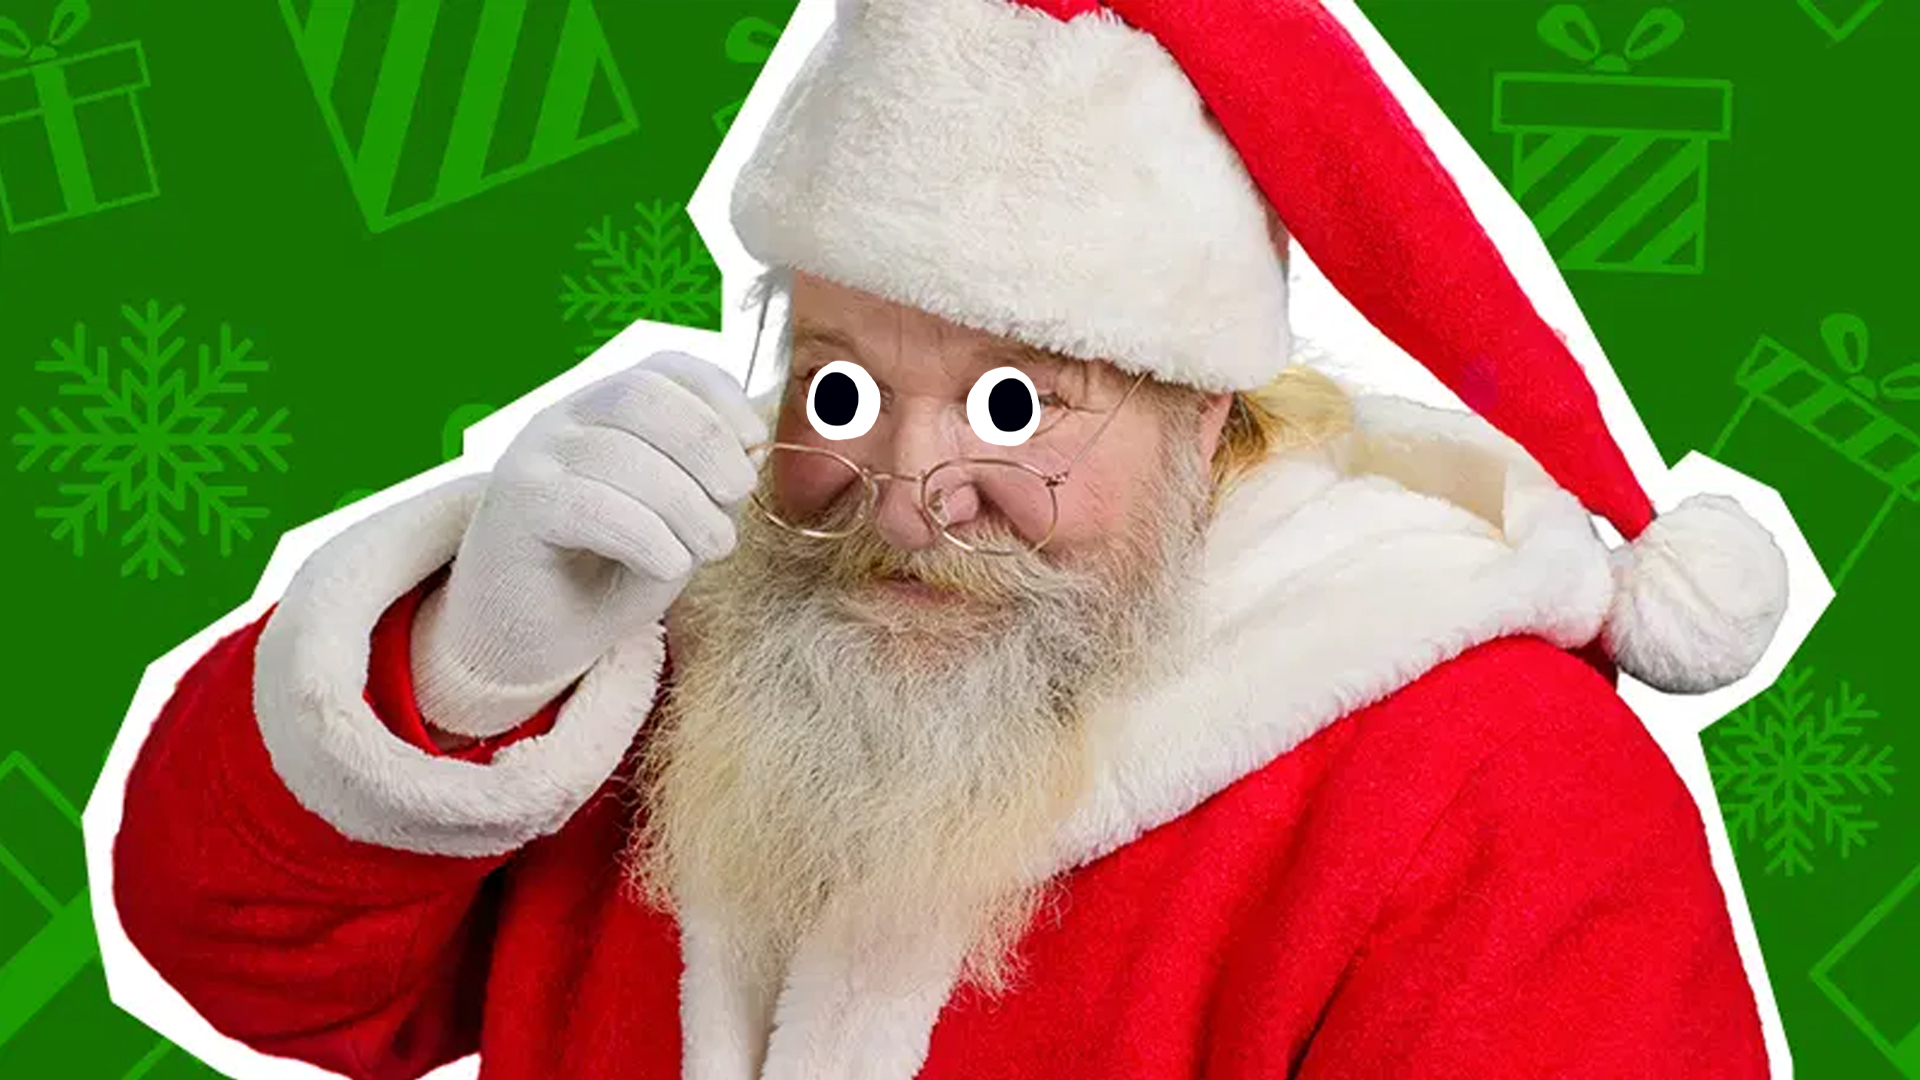 Santa looking cheeky in front of a green festive background